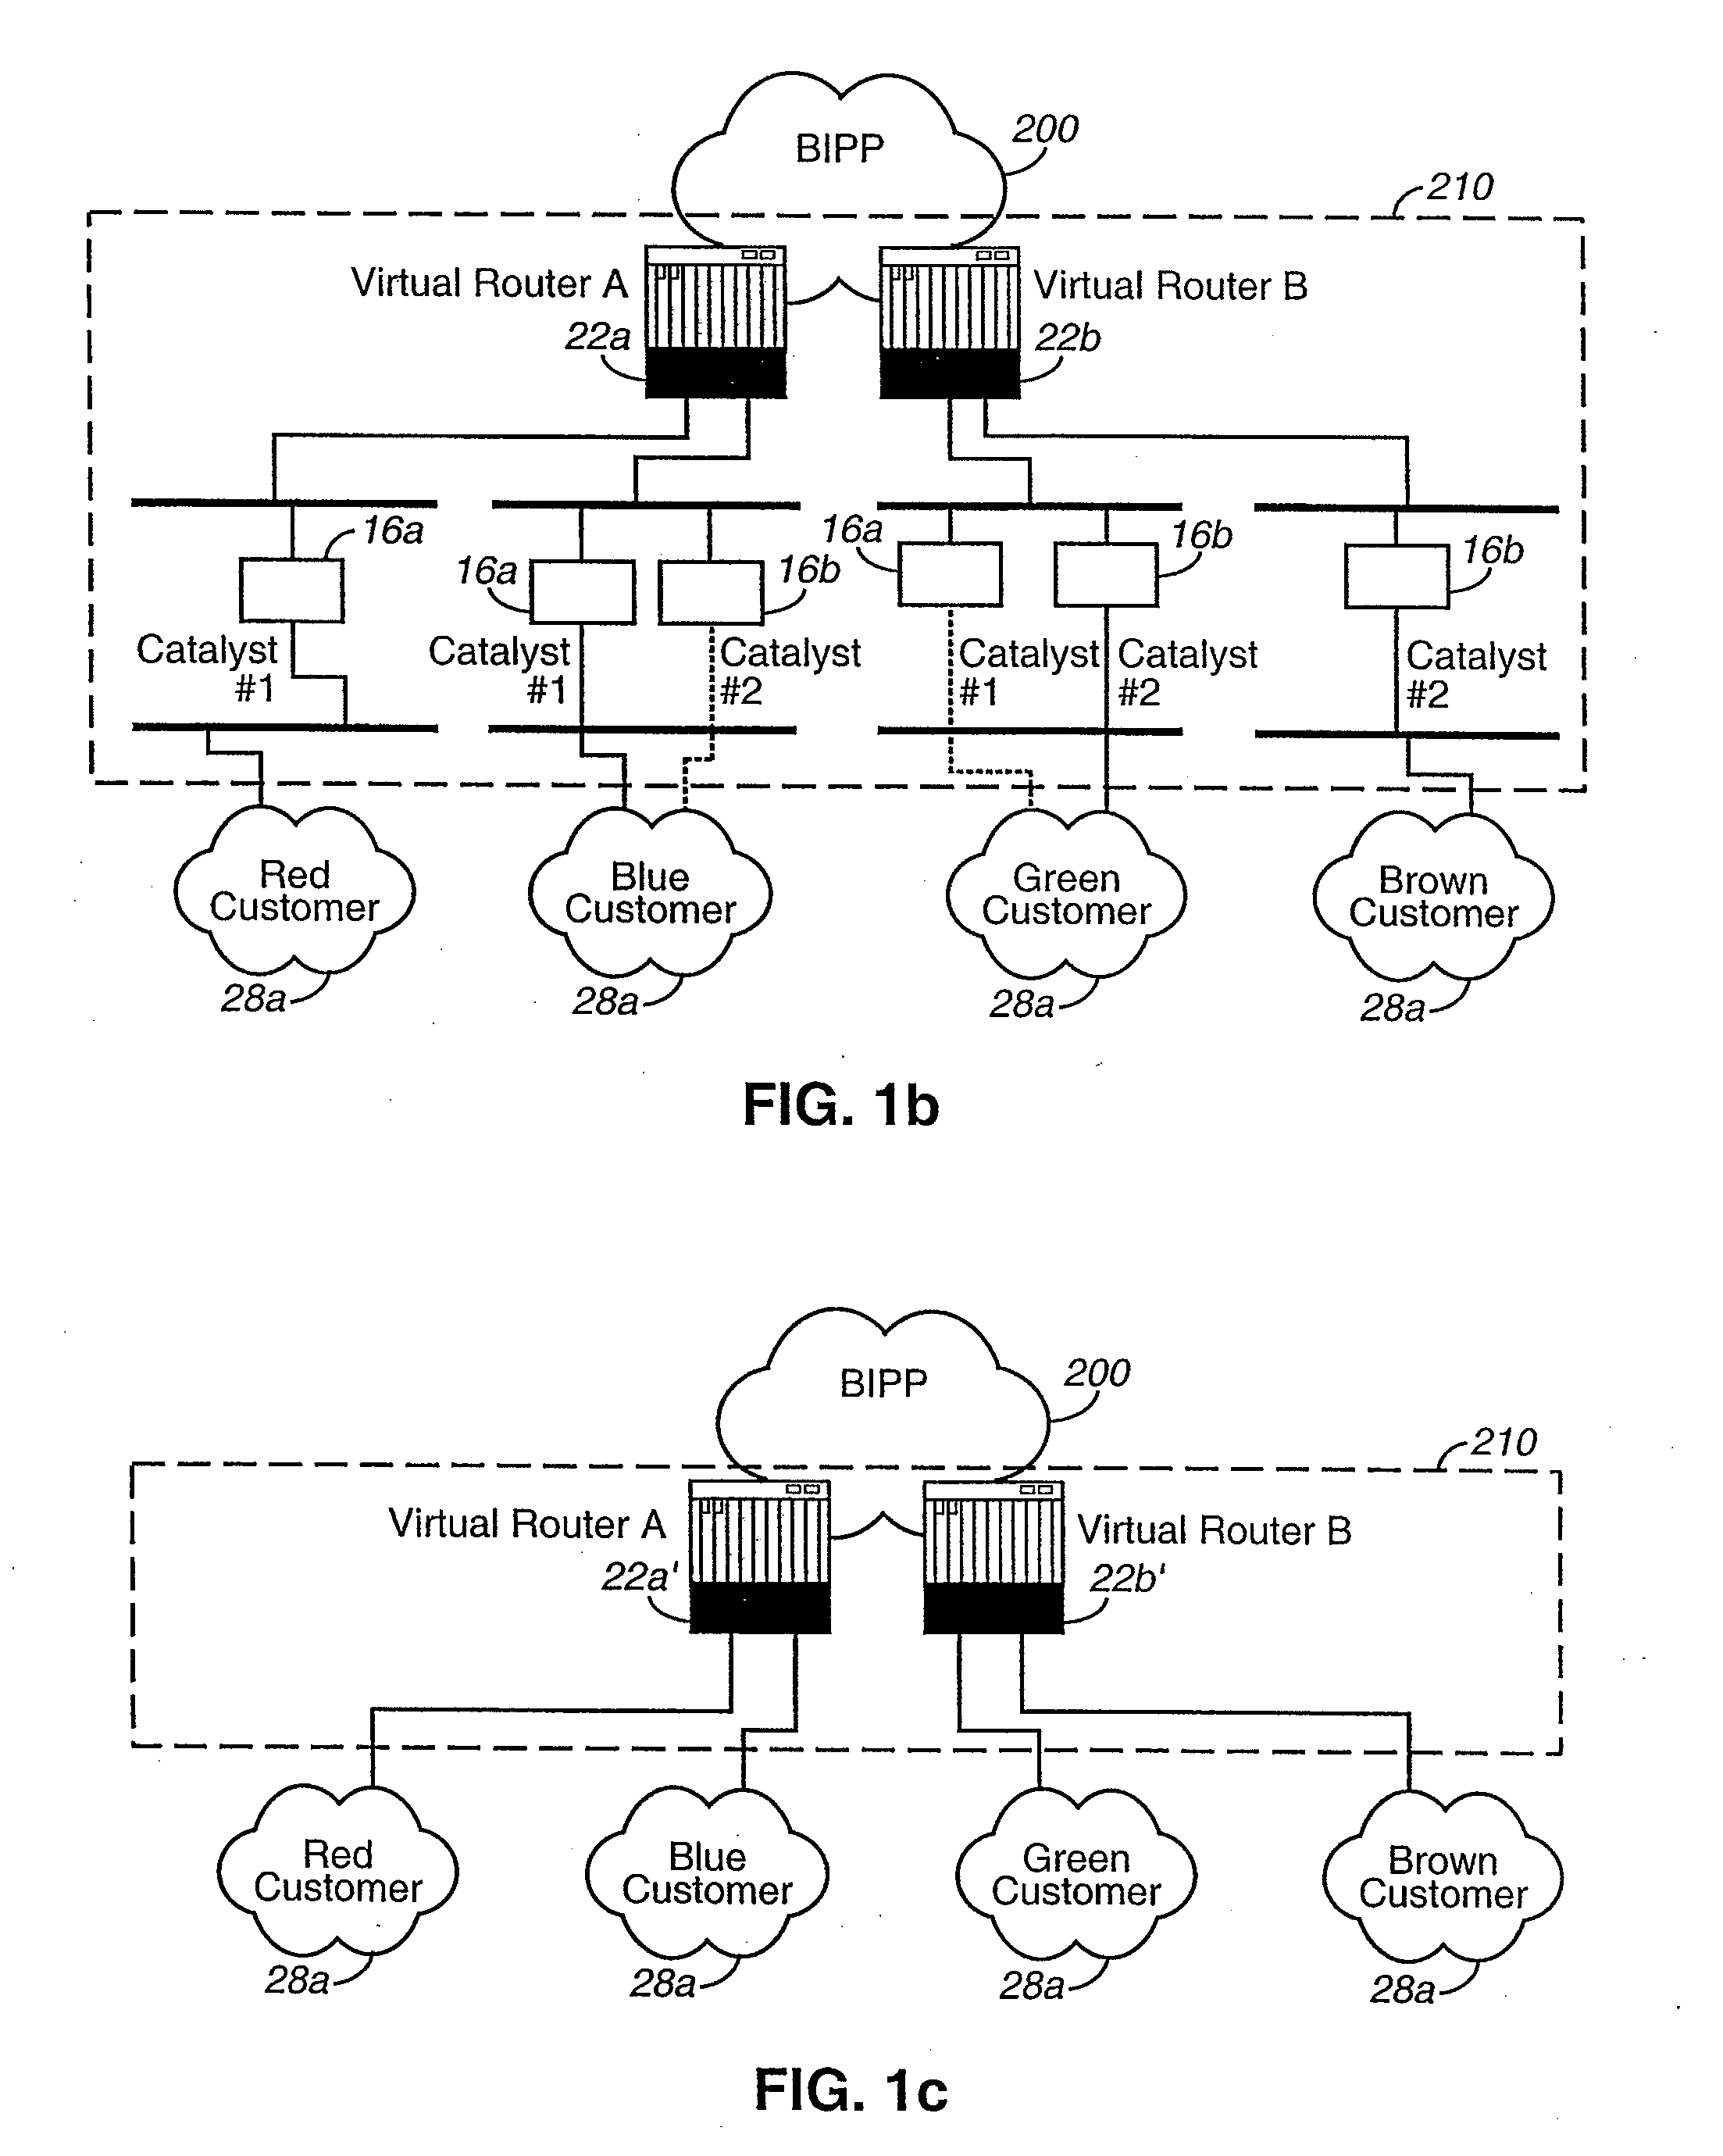 High resiliency network intrastructure